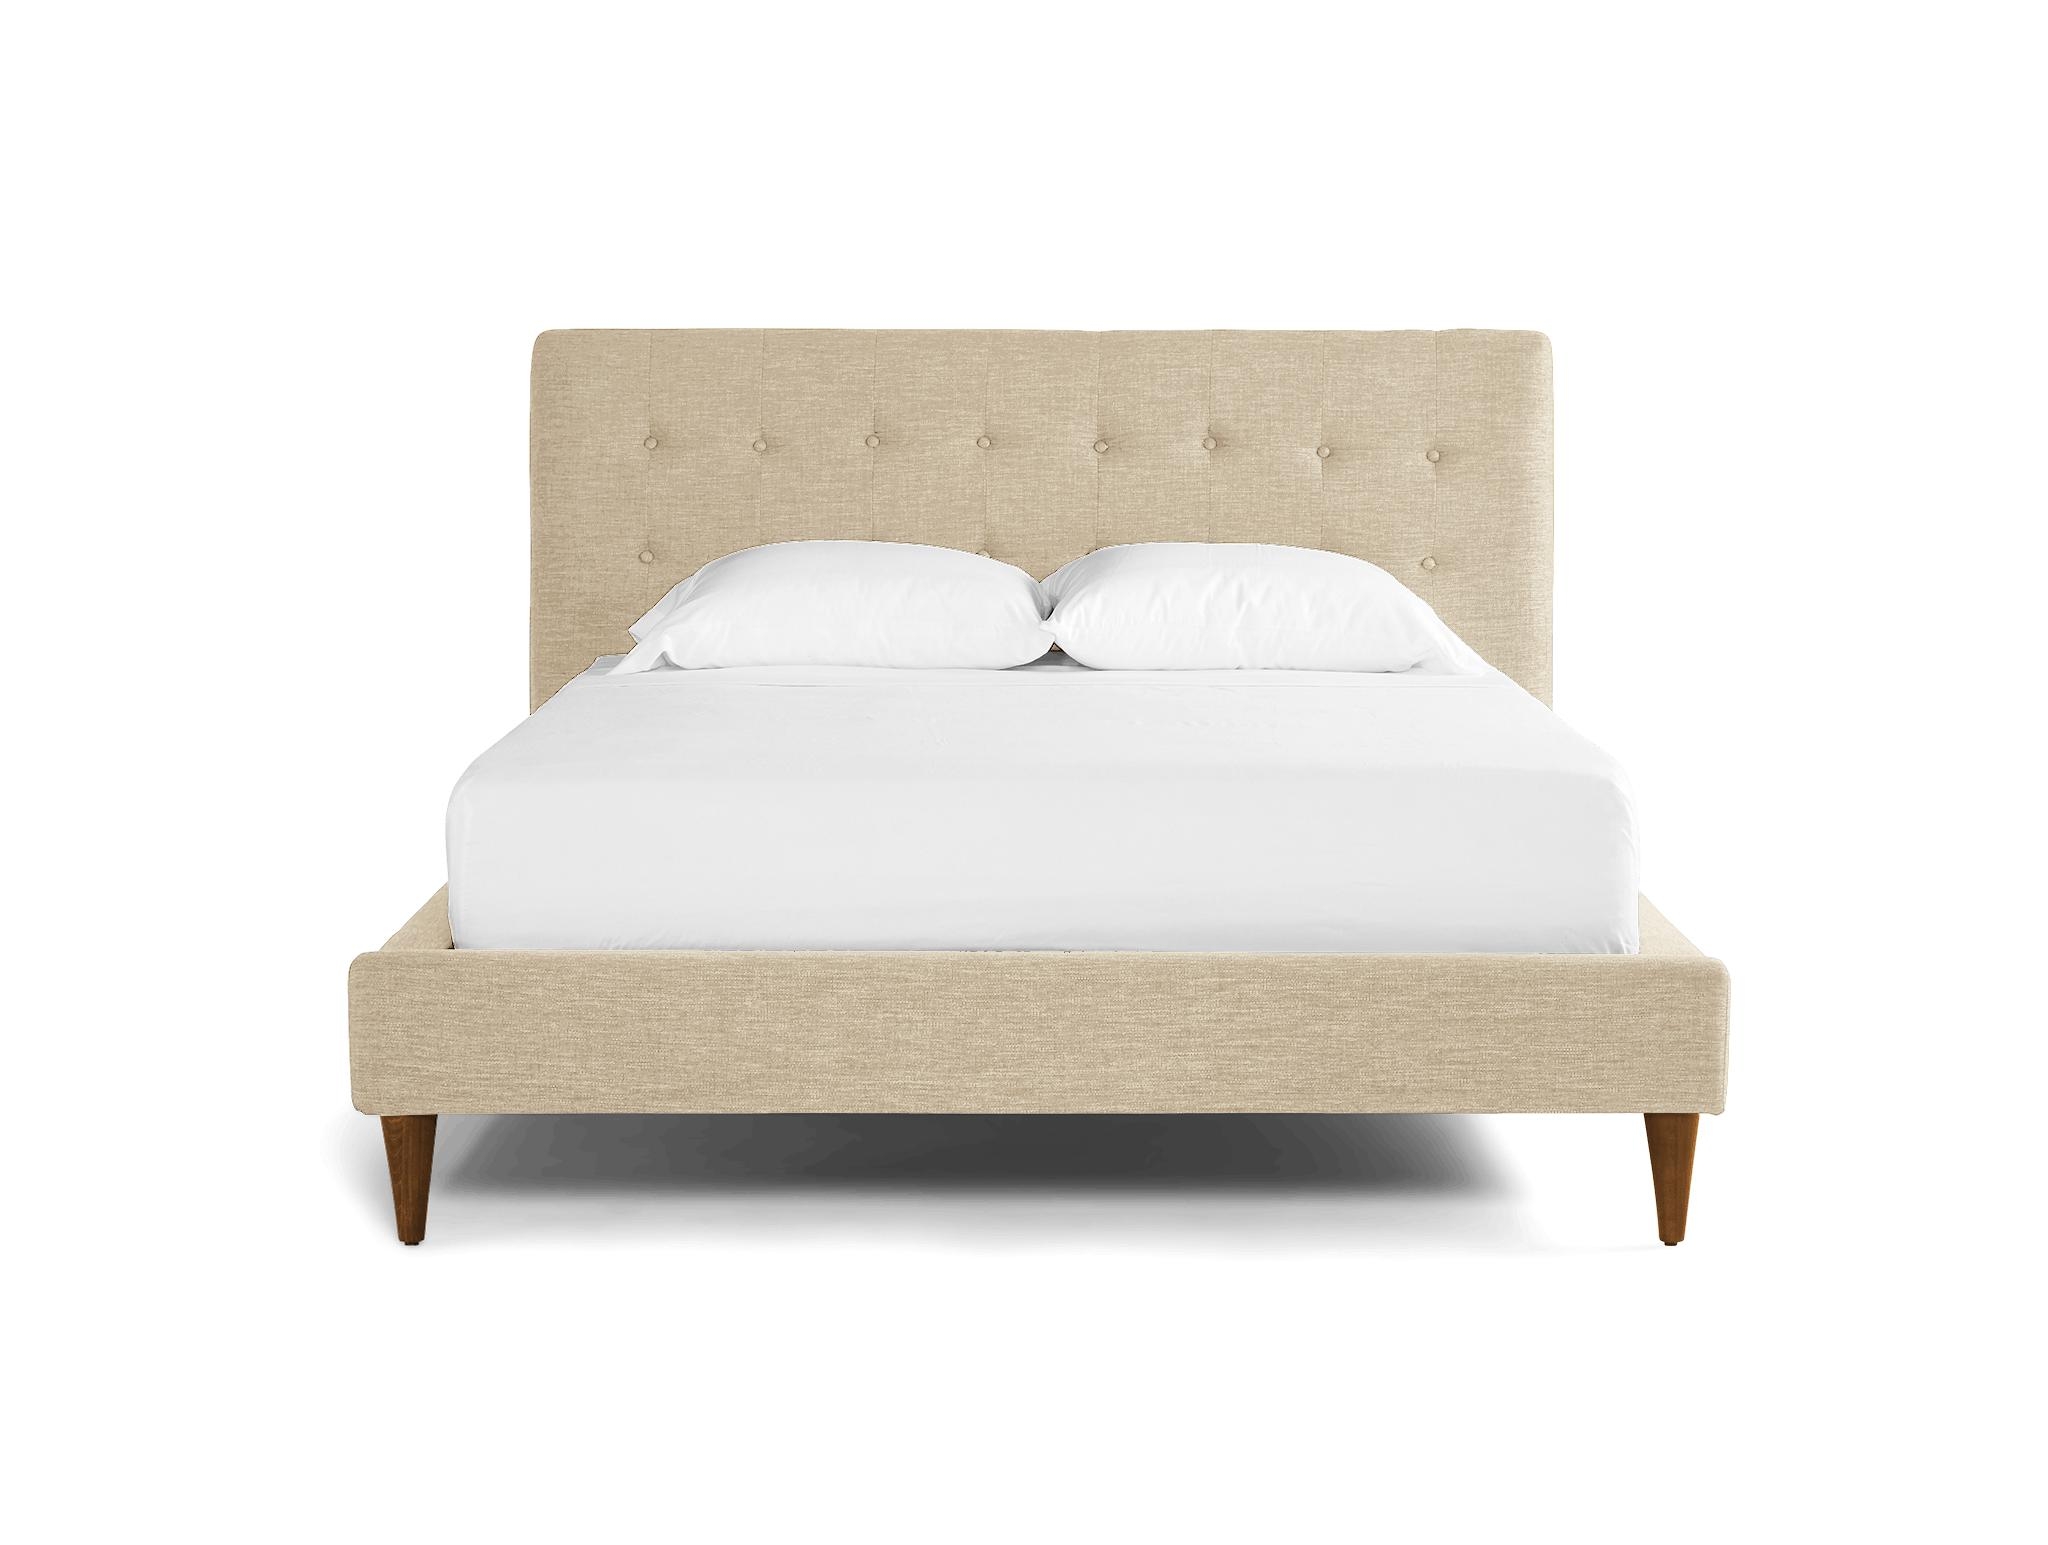 White Eliot Mid Century Modern Bed - Nico Oyster - Mocha - Queen - Image 0